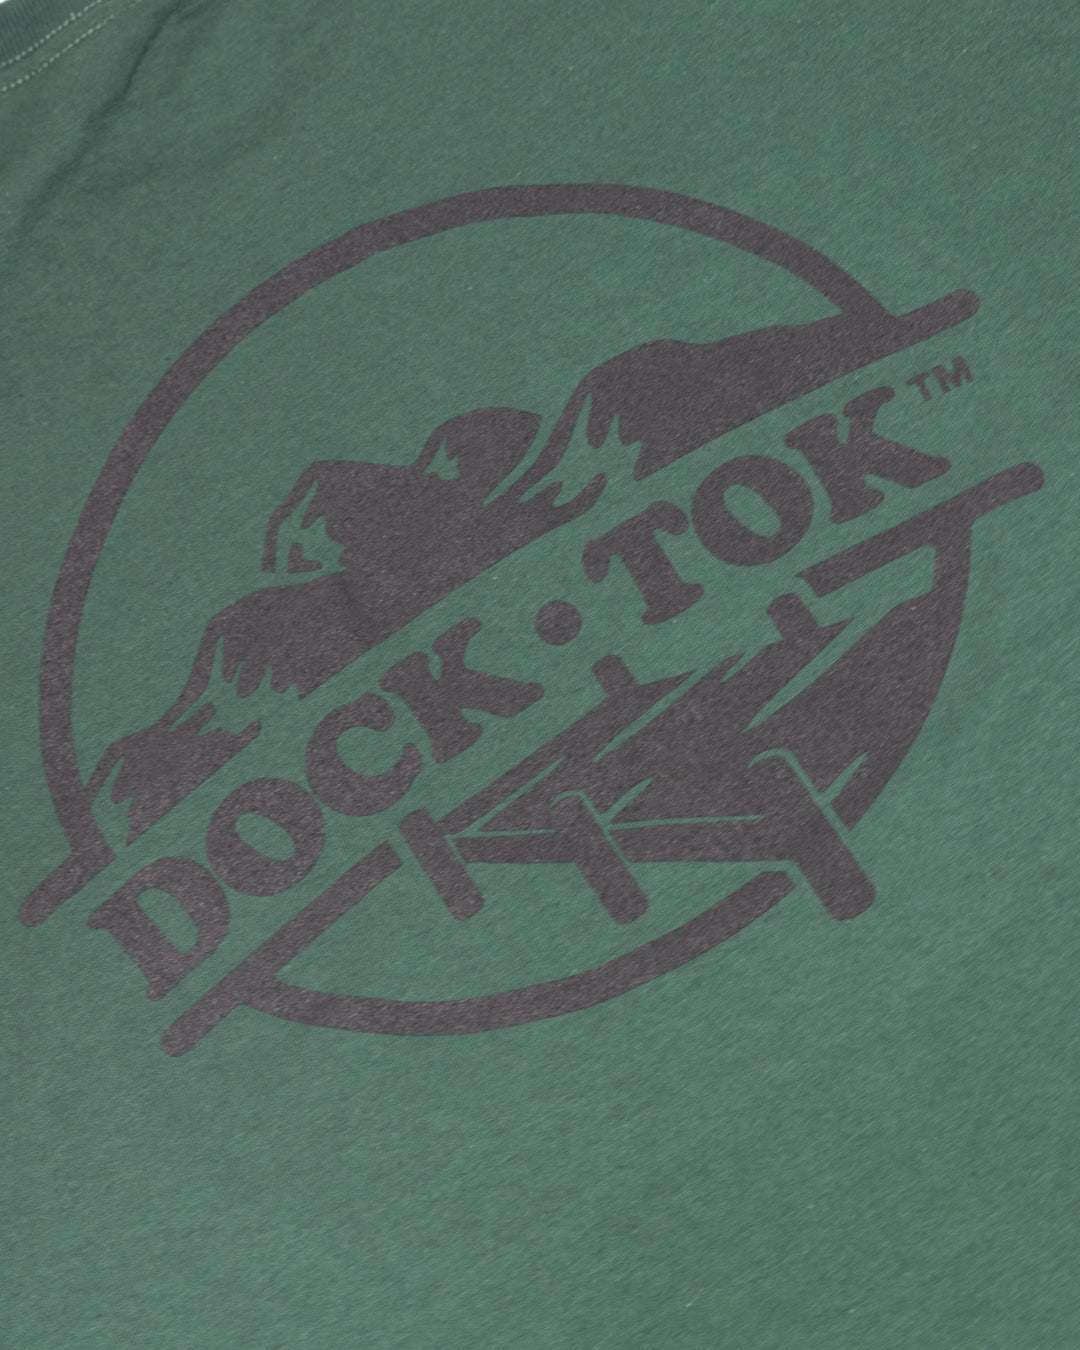 Dock Tok Tee- Forest Green